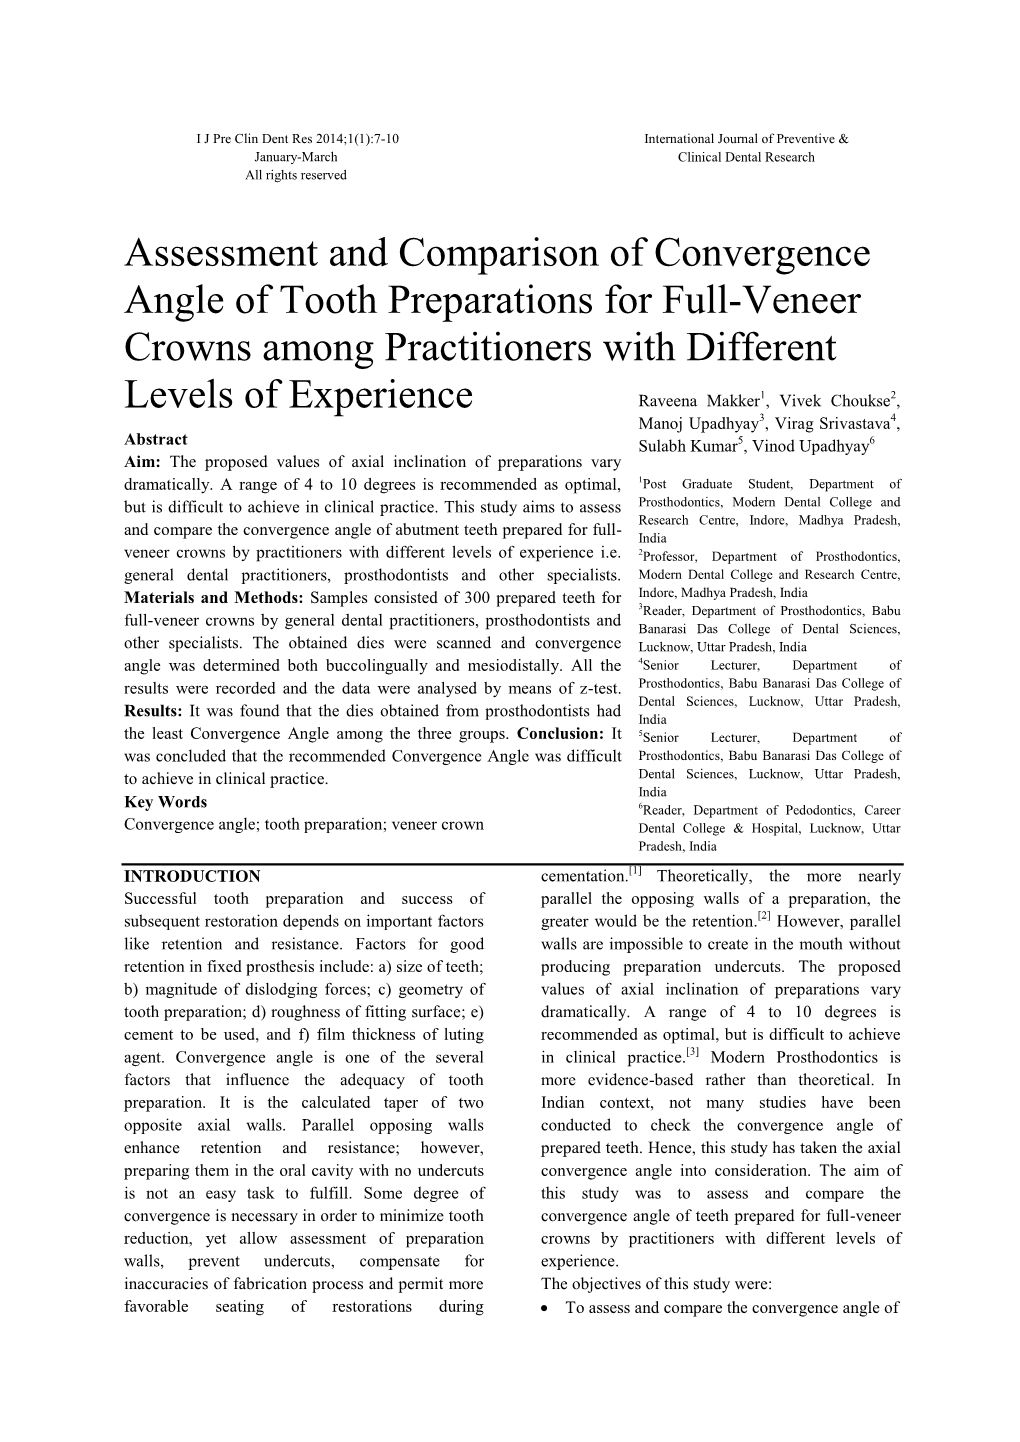 Assessment and Comparison of Convergence Angle of Tooth Preparations for Full-Veneer Crowns Among Practitioners with Different